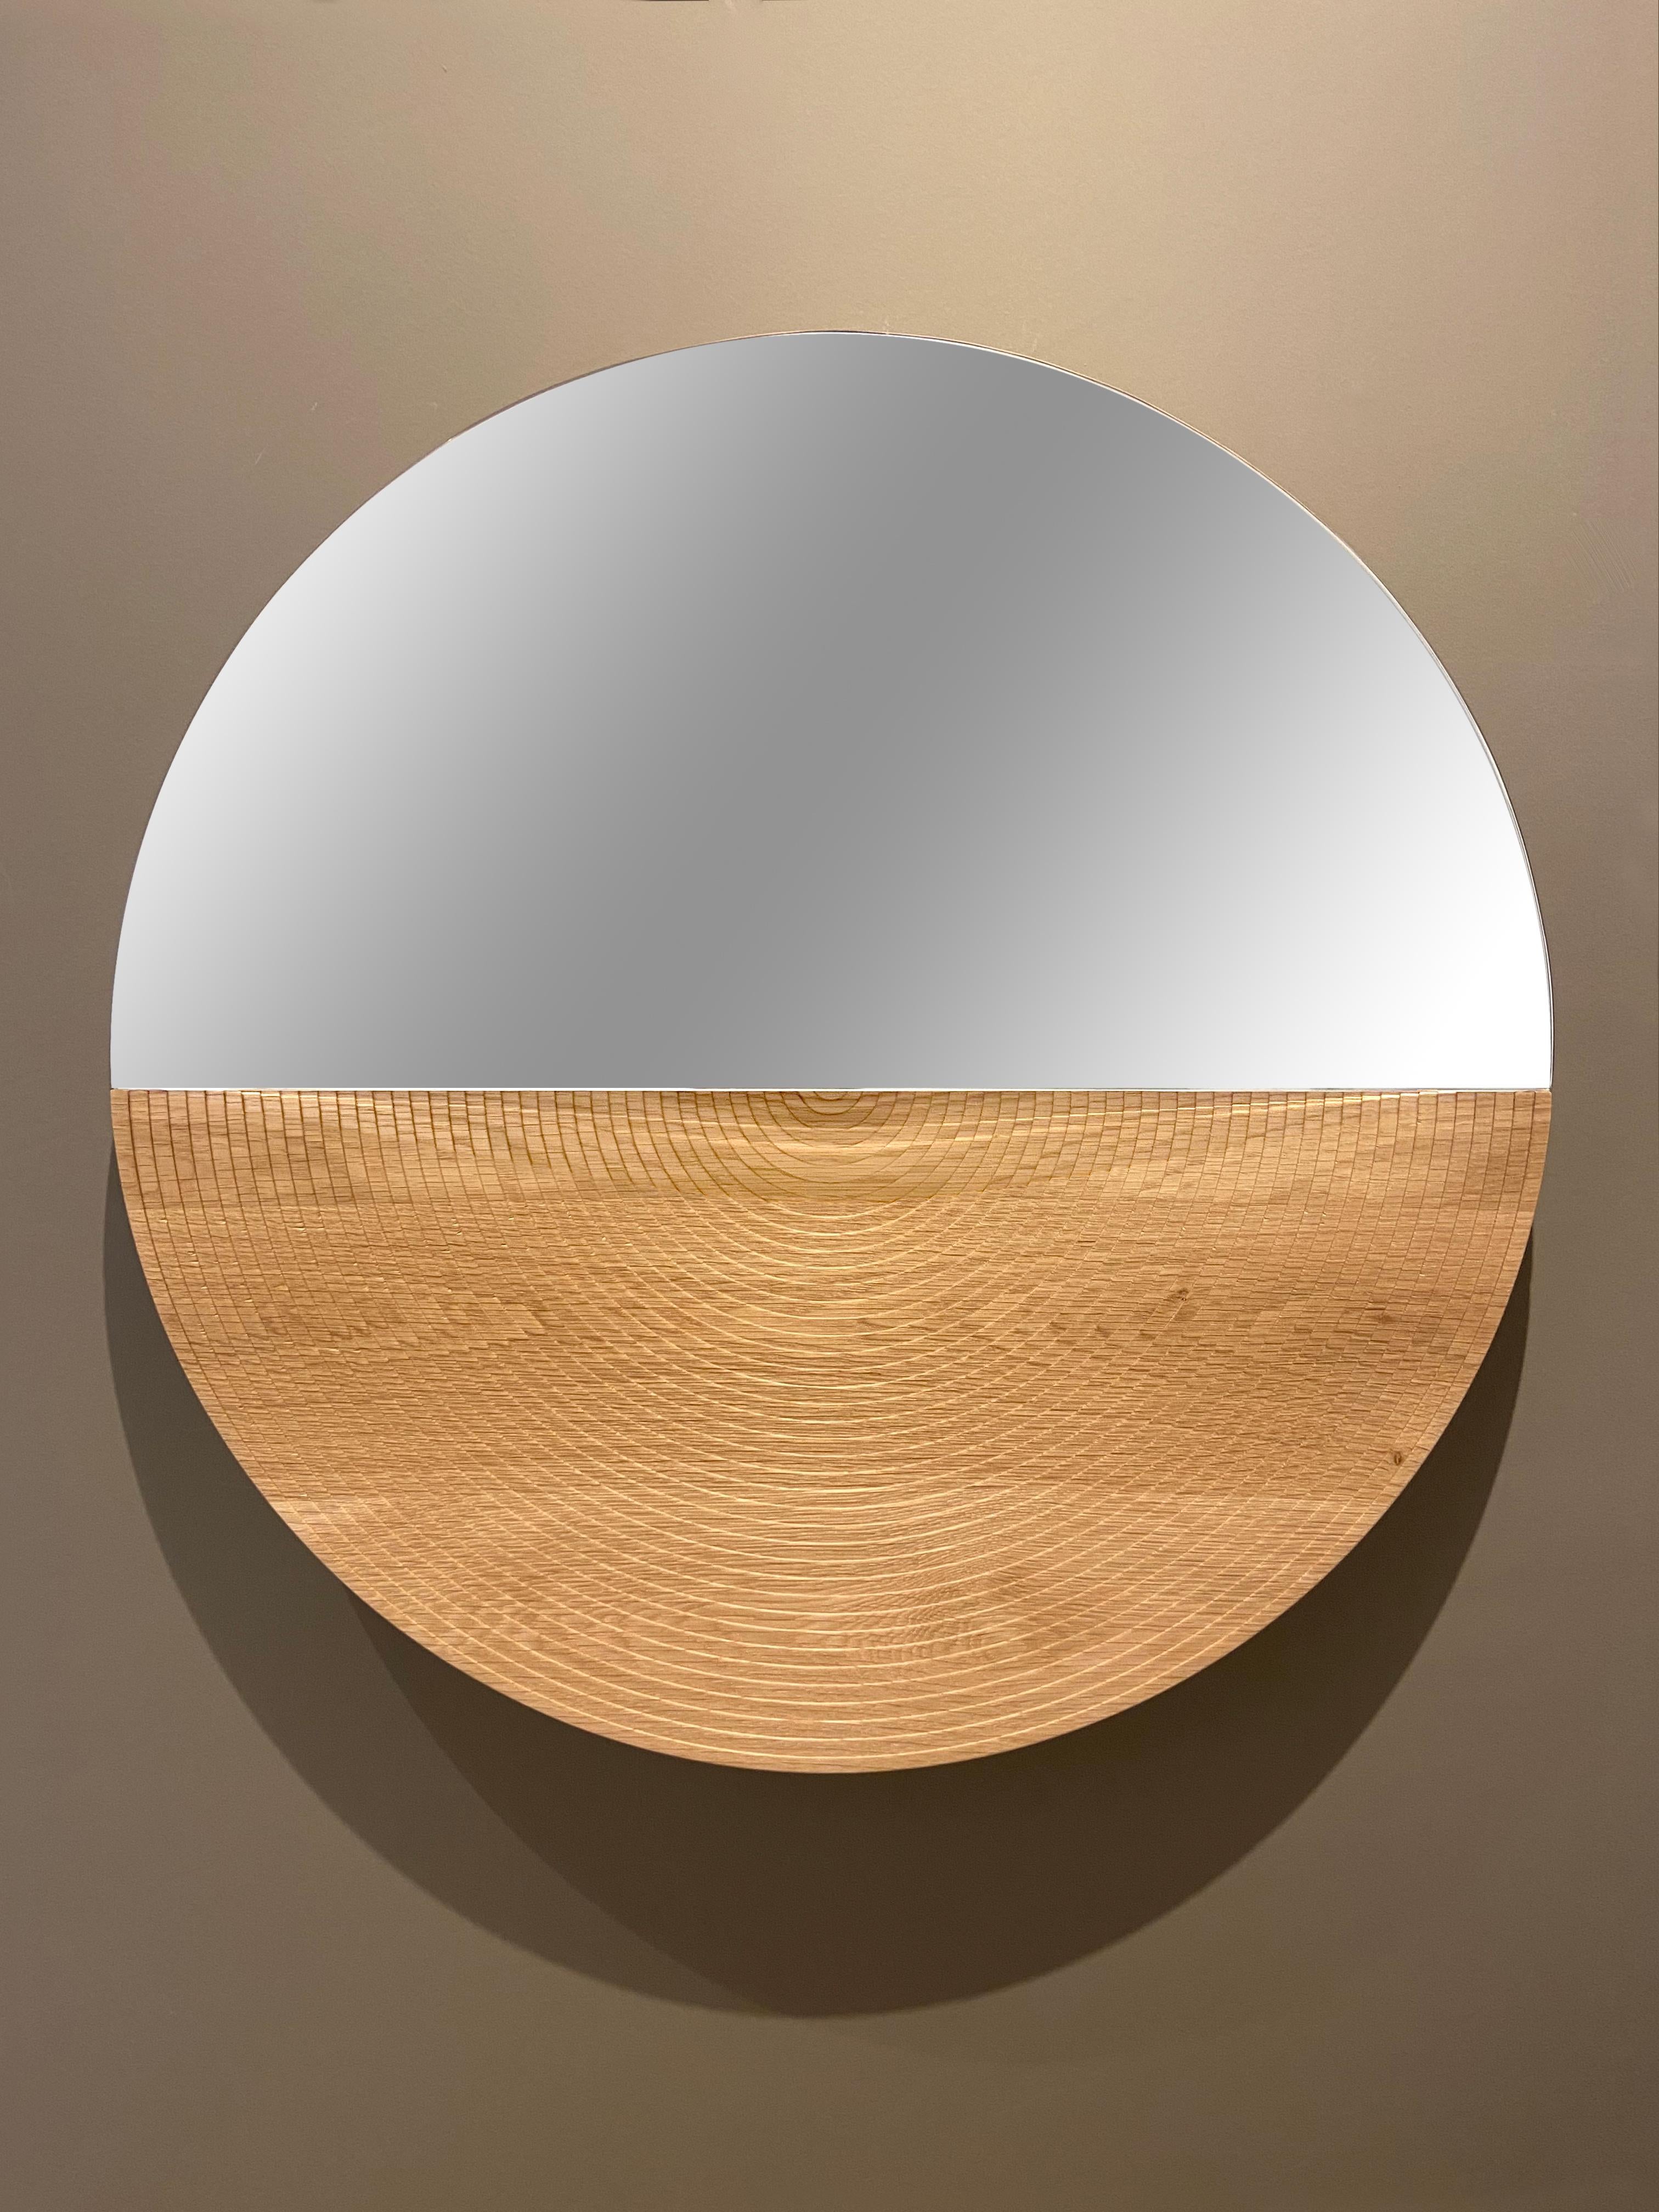 Arkhe mirror table is a graceful combination of functionality, simplicity and sculptural posture. The natural beauty of oak, exquisite craftsmanship and the inspiration coming from stunning amphitheaters of old times gives this mirror its timeless